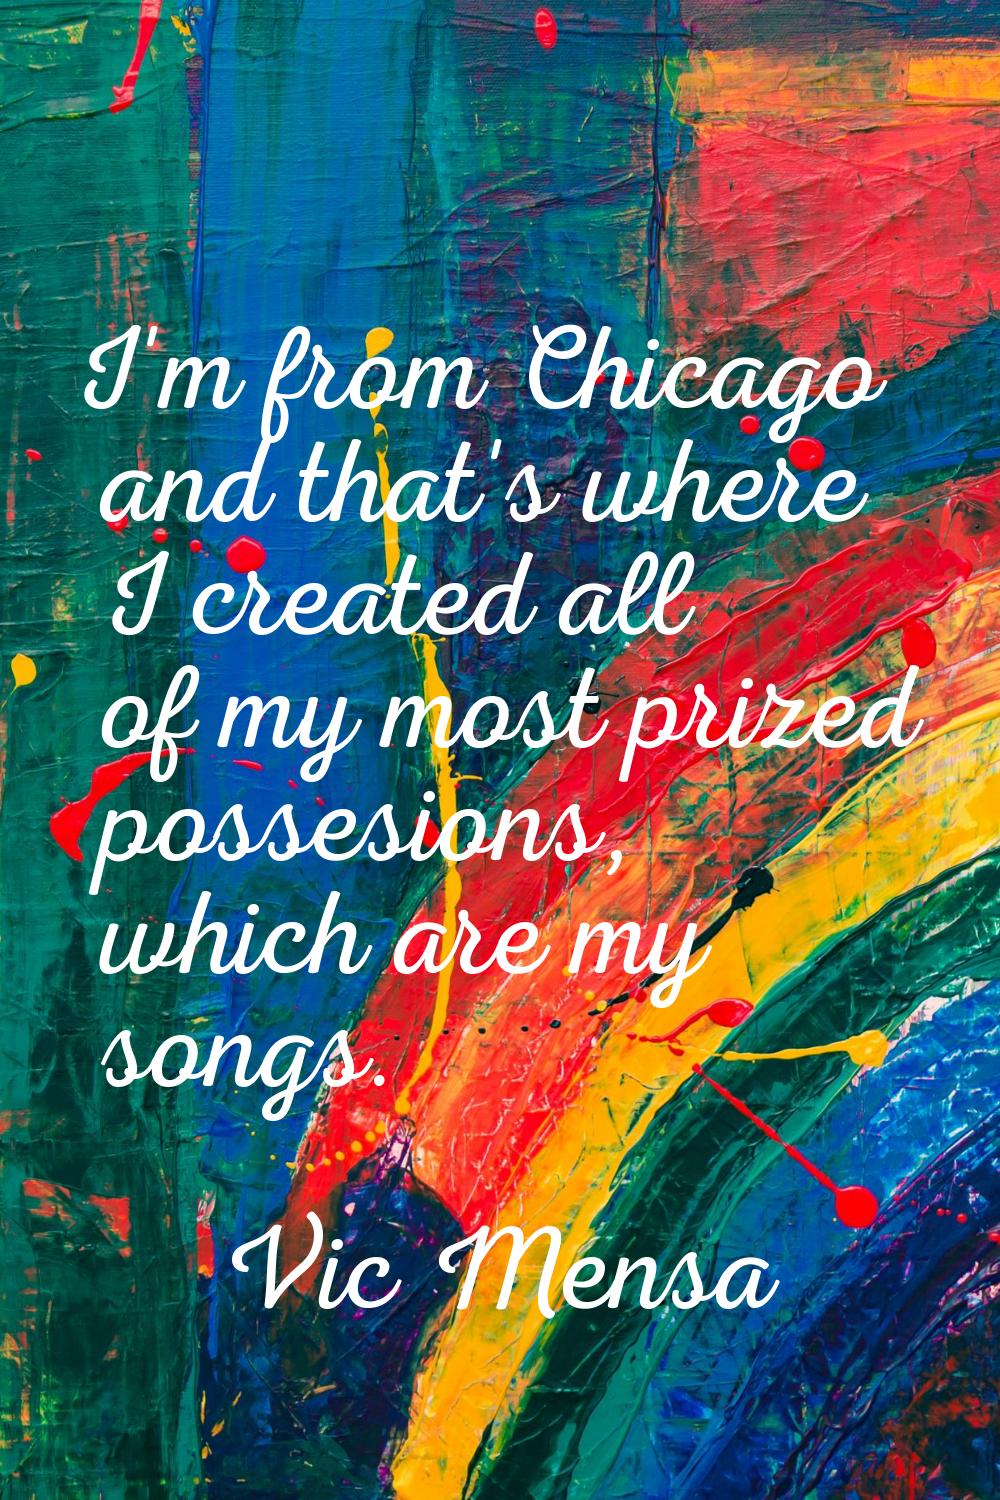 I'm from Chicago and that's where I created all of my most prized possesions, which are my songs.